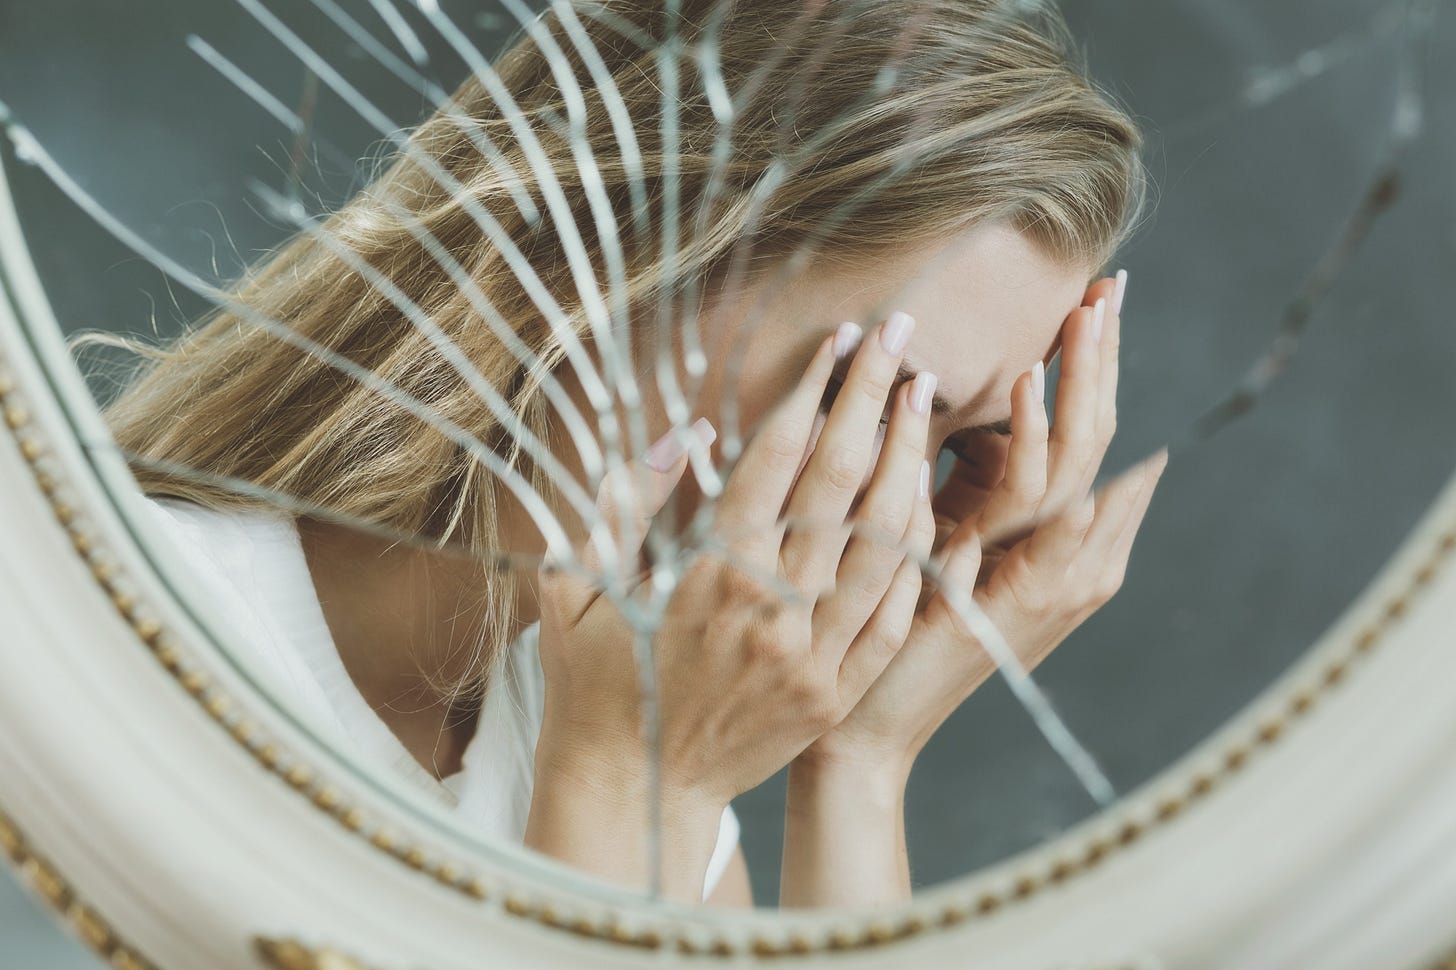 A woman holds her face in her hands and cries in the reflection of a shattered mirror.